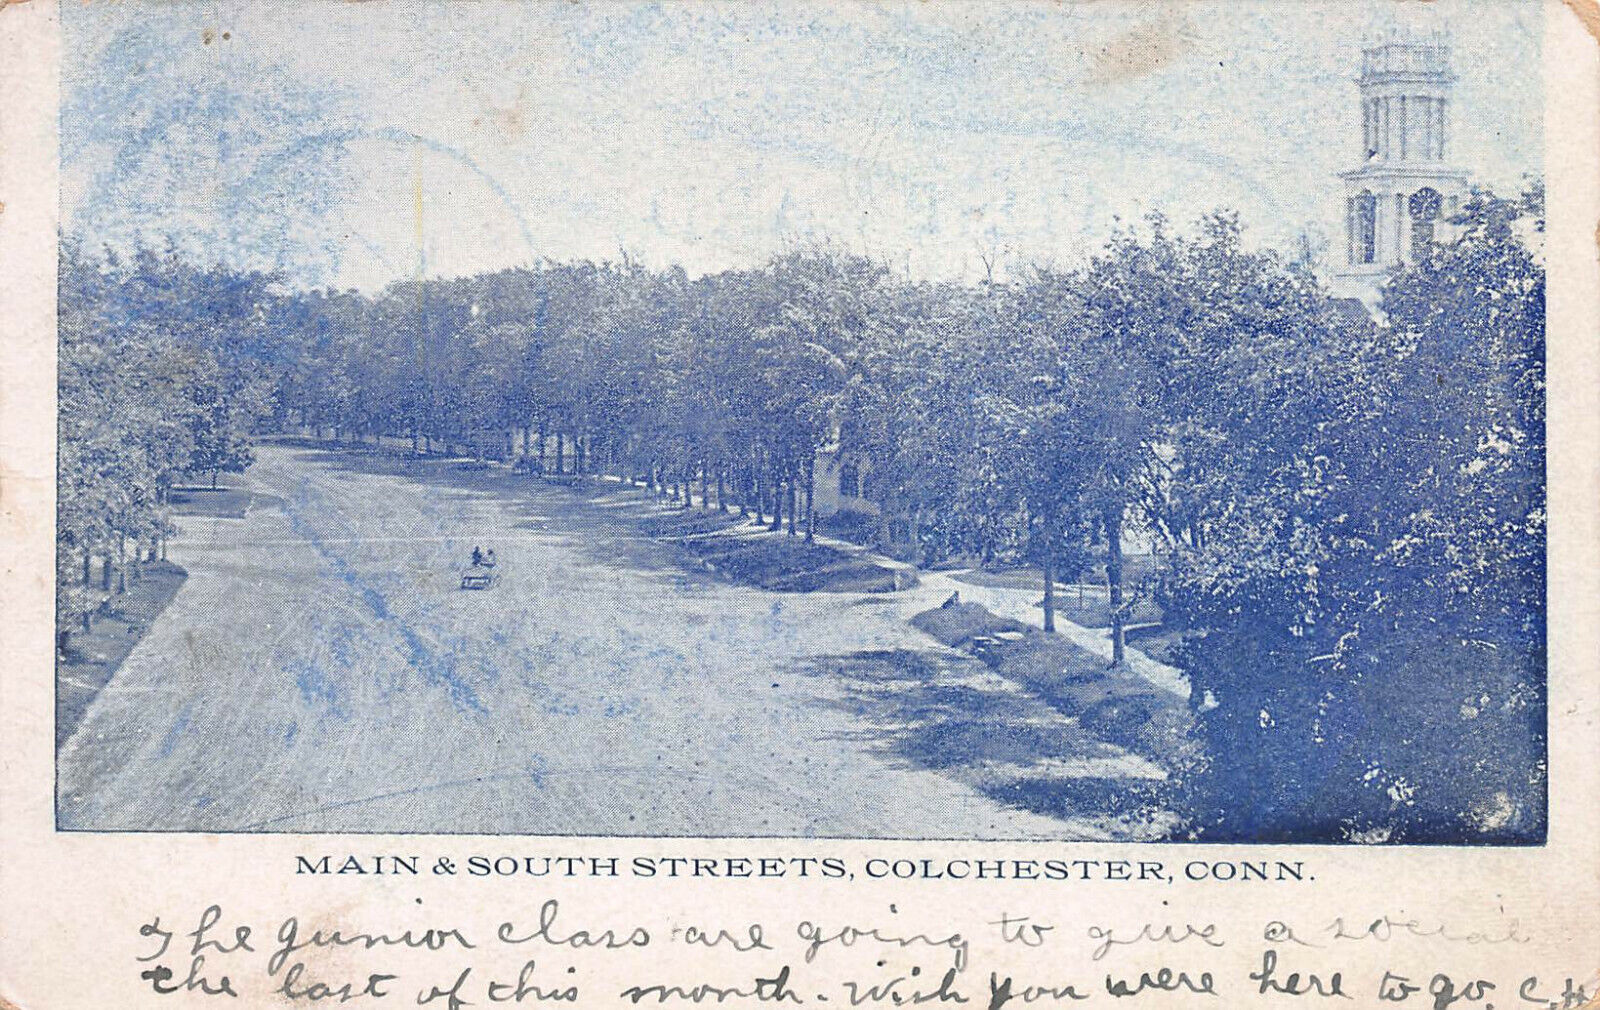 Main & South Streets, Colchester, Connecticut, Very Early Postcard, Used in 1908